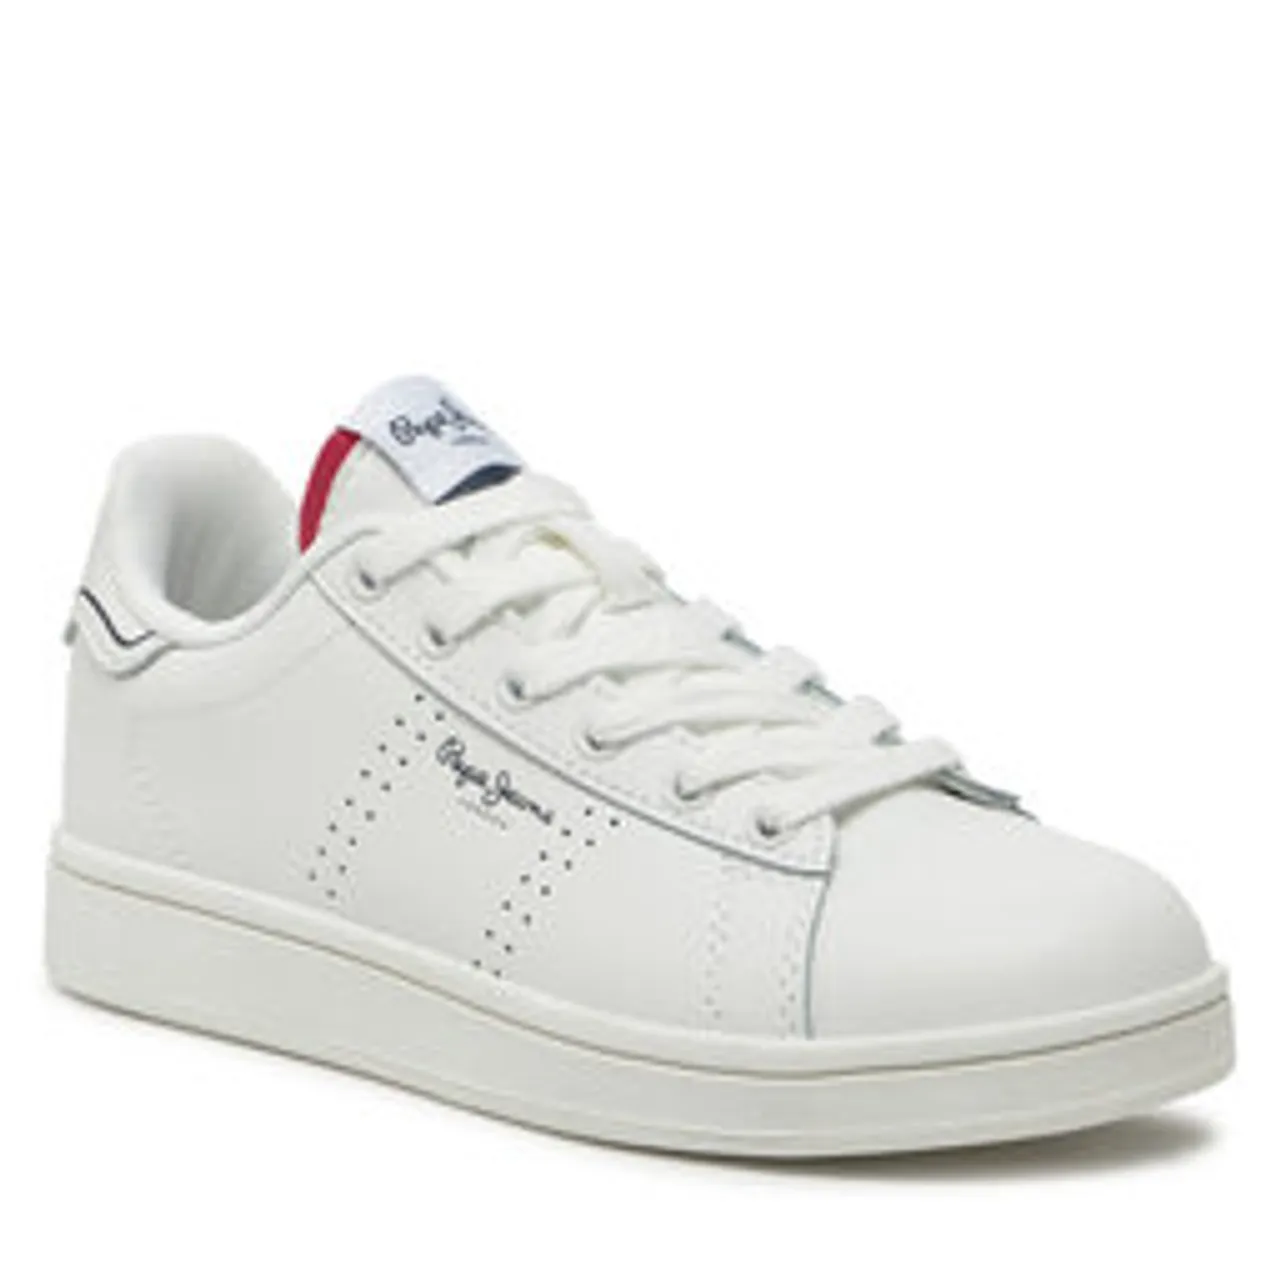 Sneakers Pepe Jeans Player Basic B PBS00001 White 800